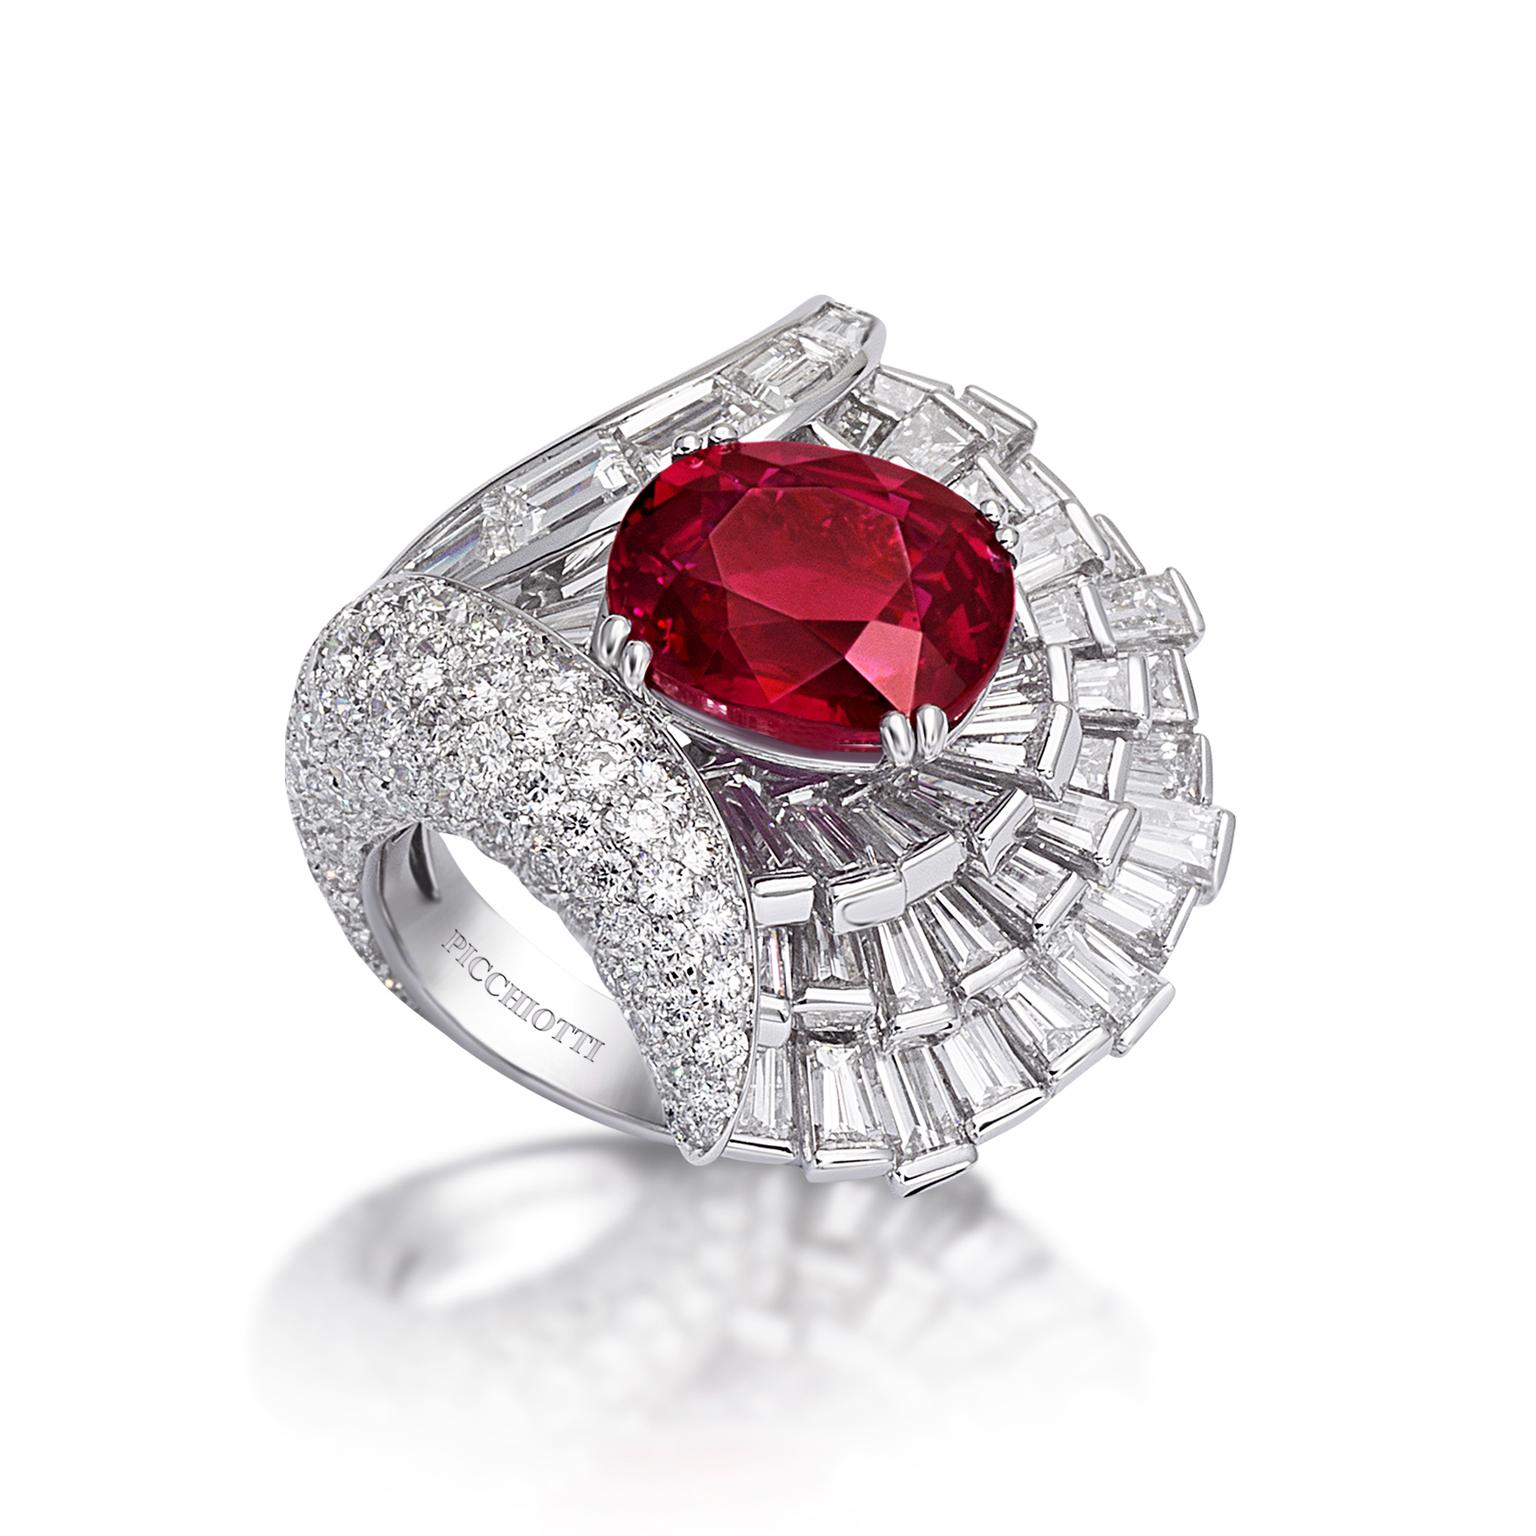 Picchiotti ruby one of a kind ring